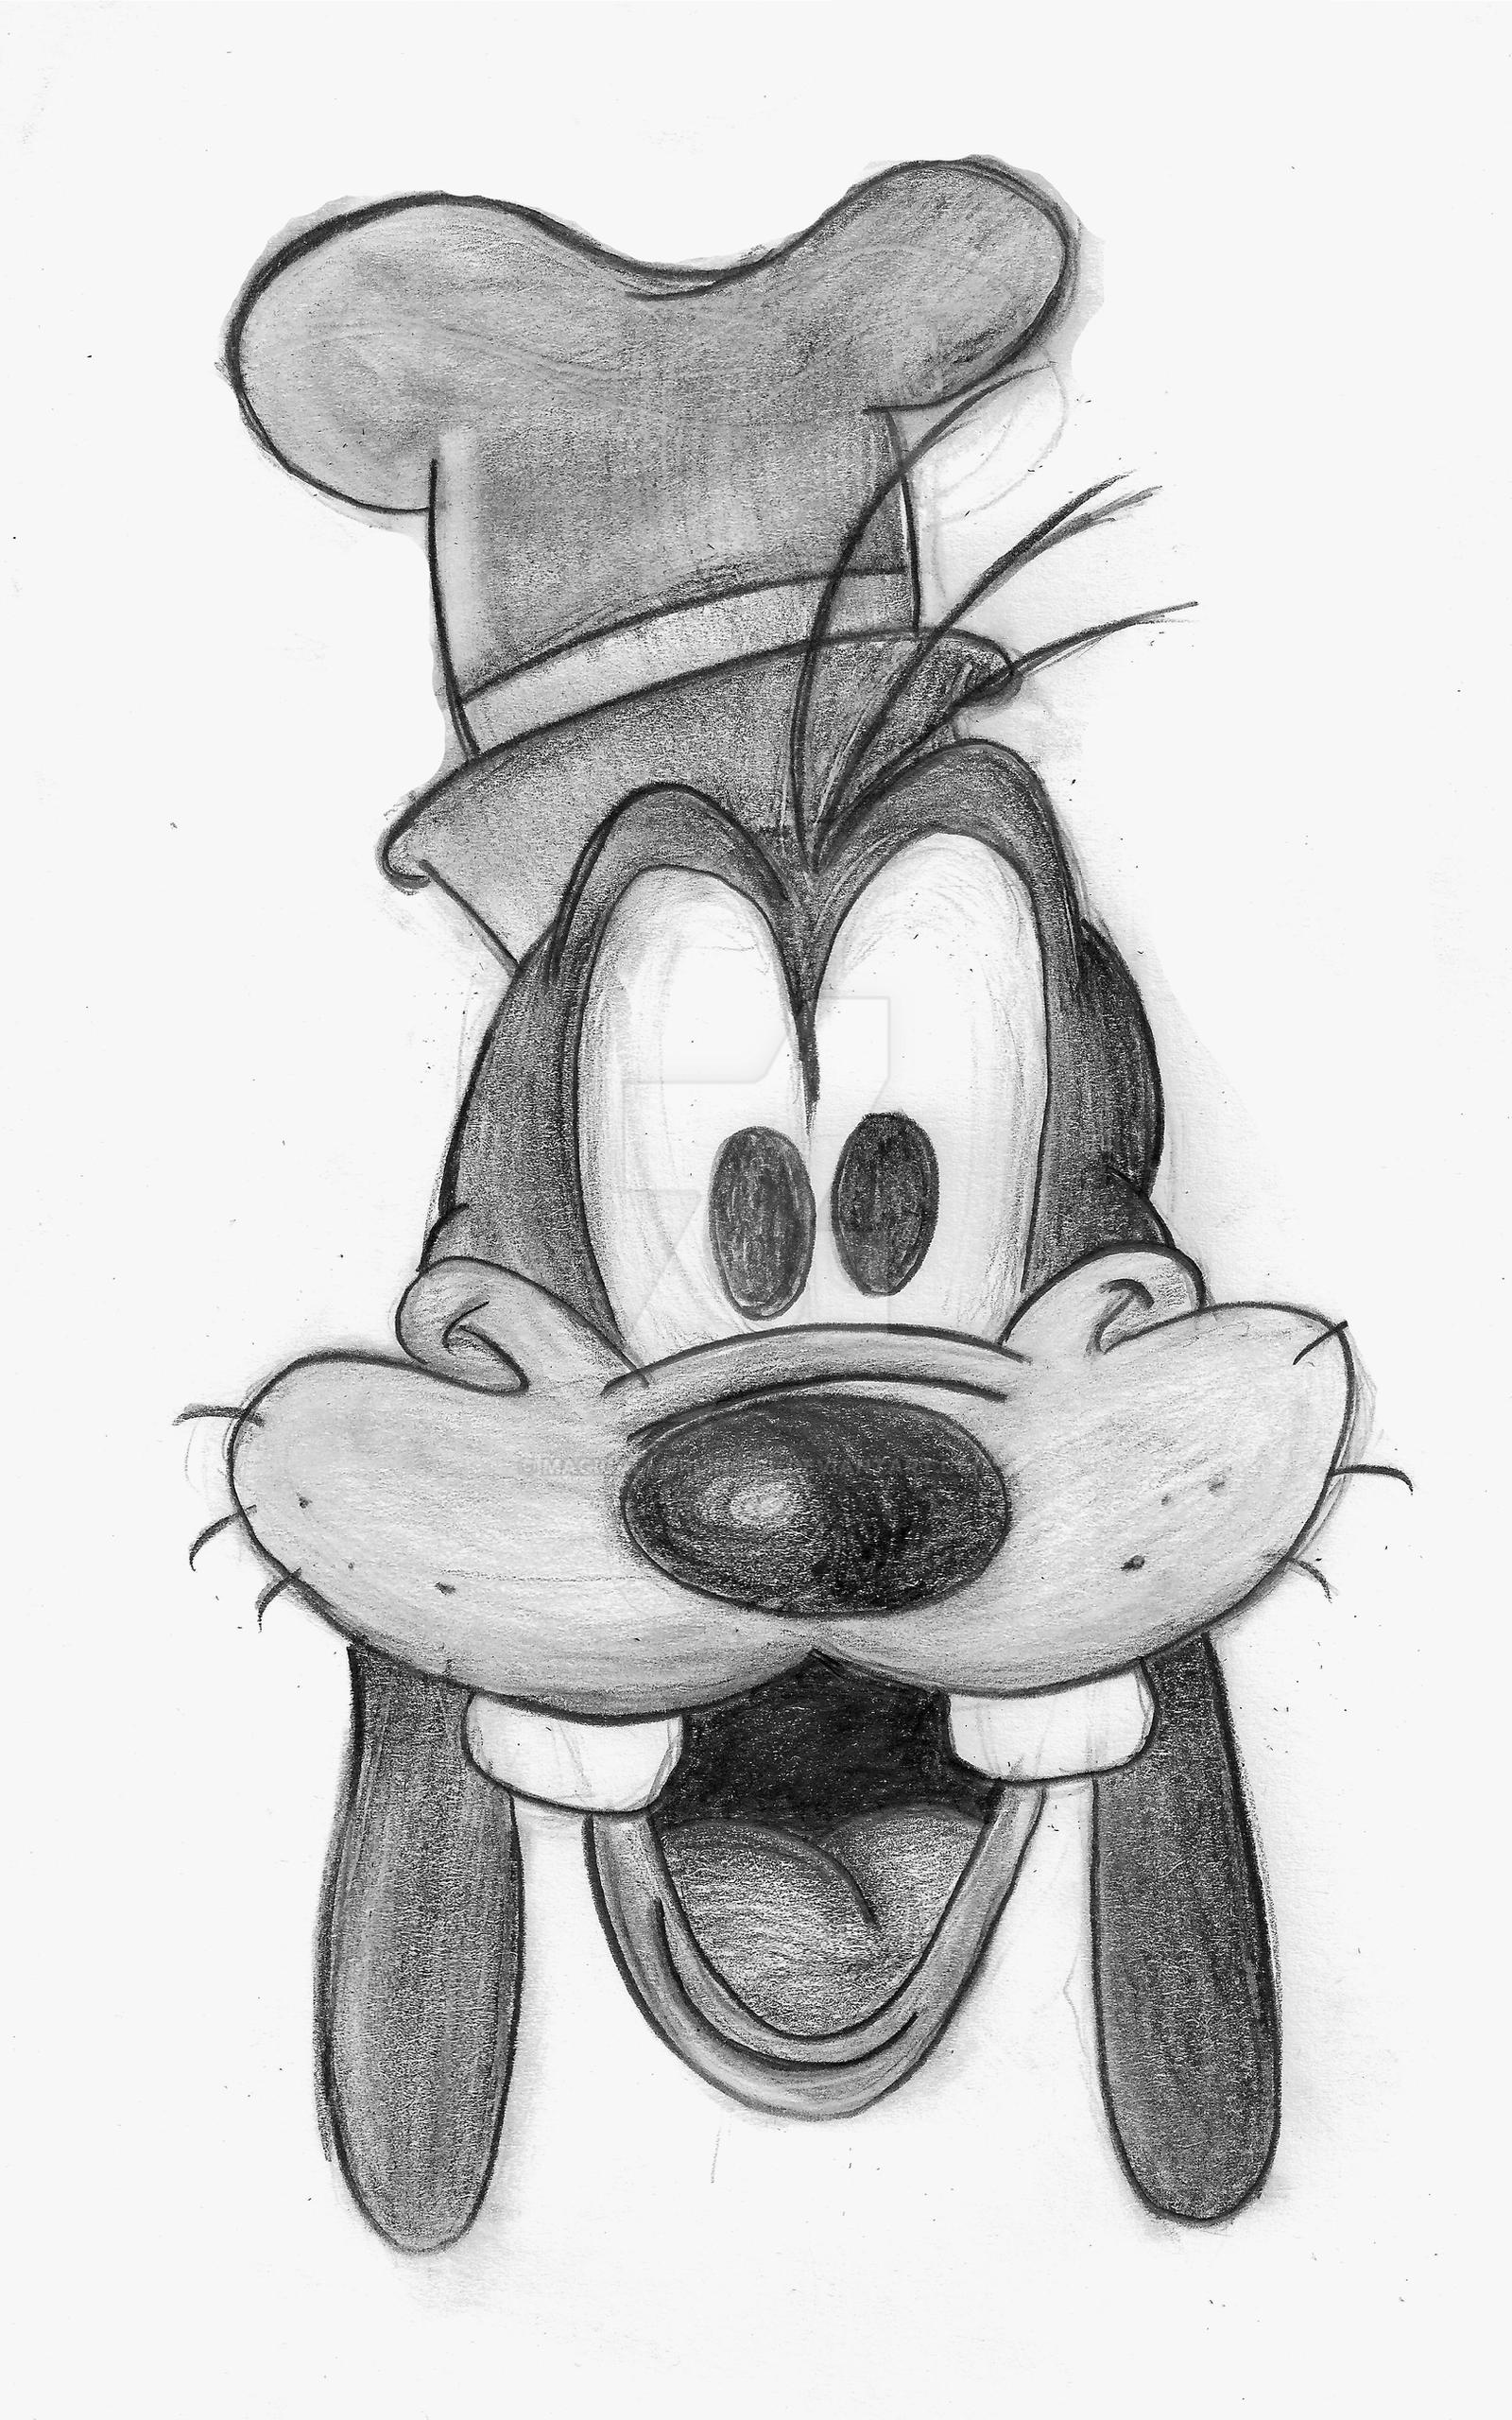 First time Goofy